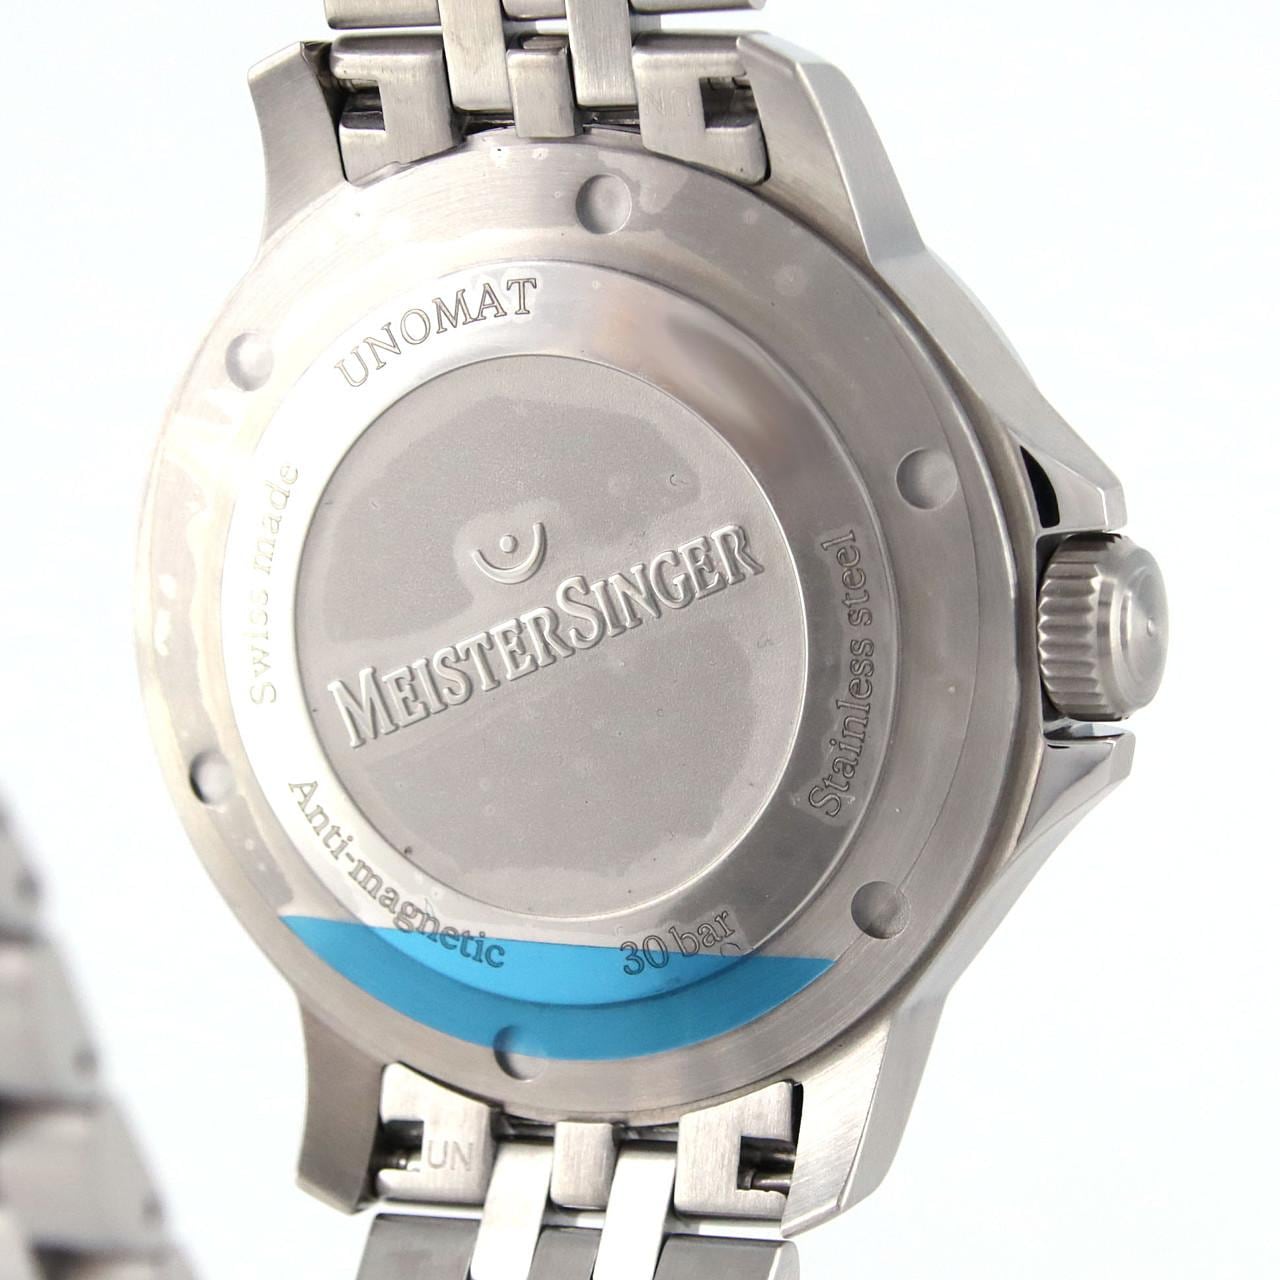 [BRAND NEW] MEISTER SINGER Unomat UN918 SS Automatic